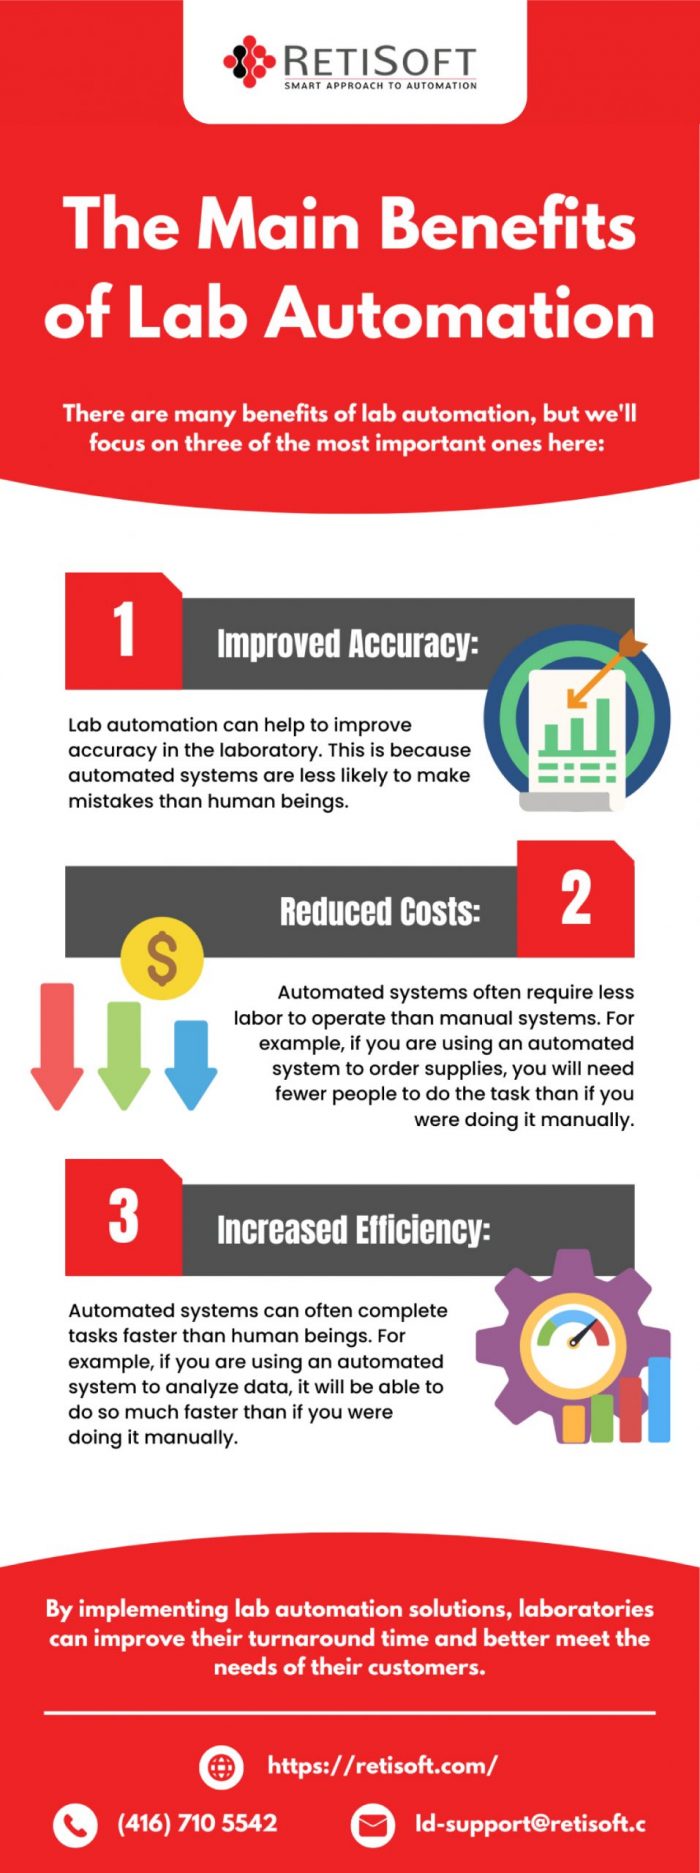 The Main Benefits of Lab Automation